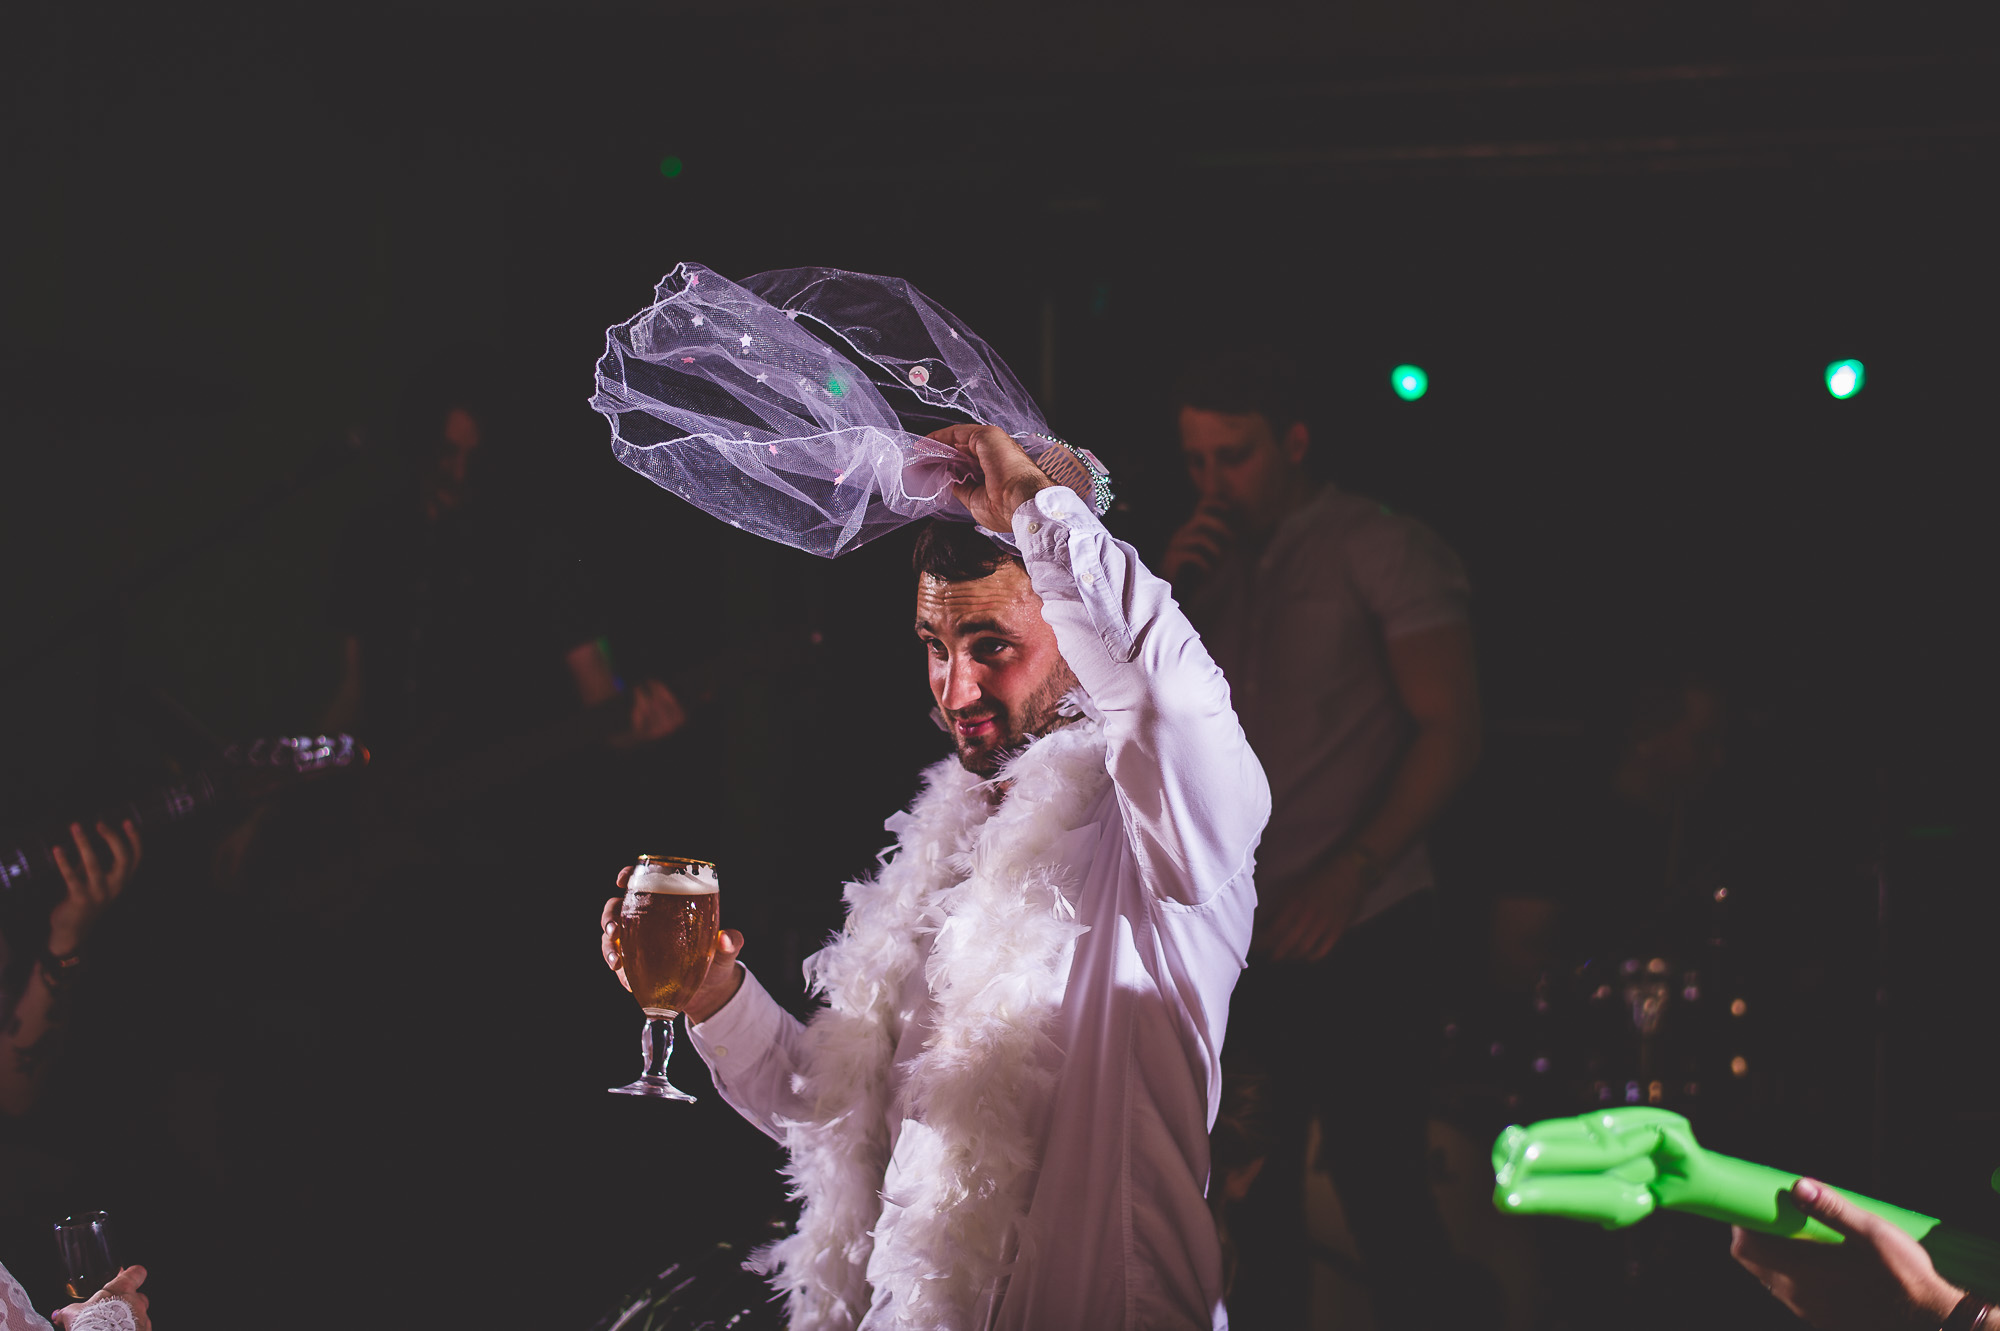 A wedding photographer captures an image of the bride holding a glass of wine.